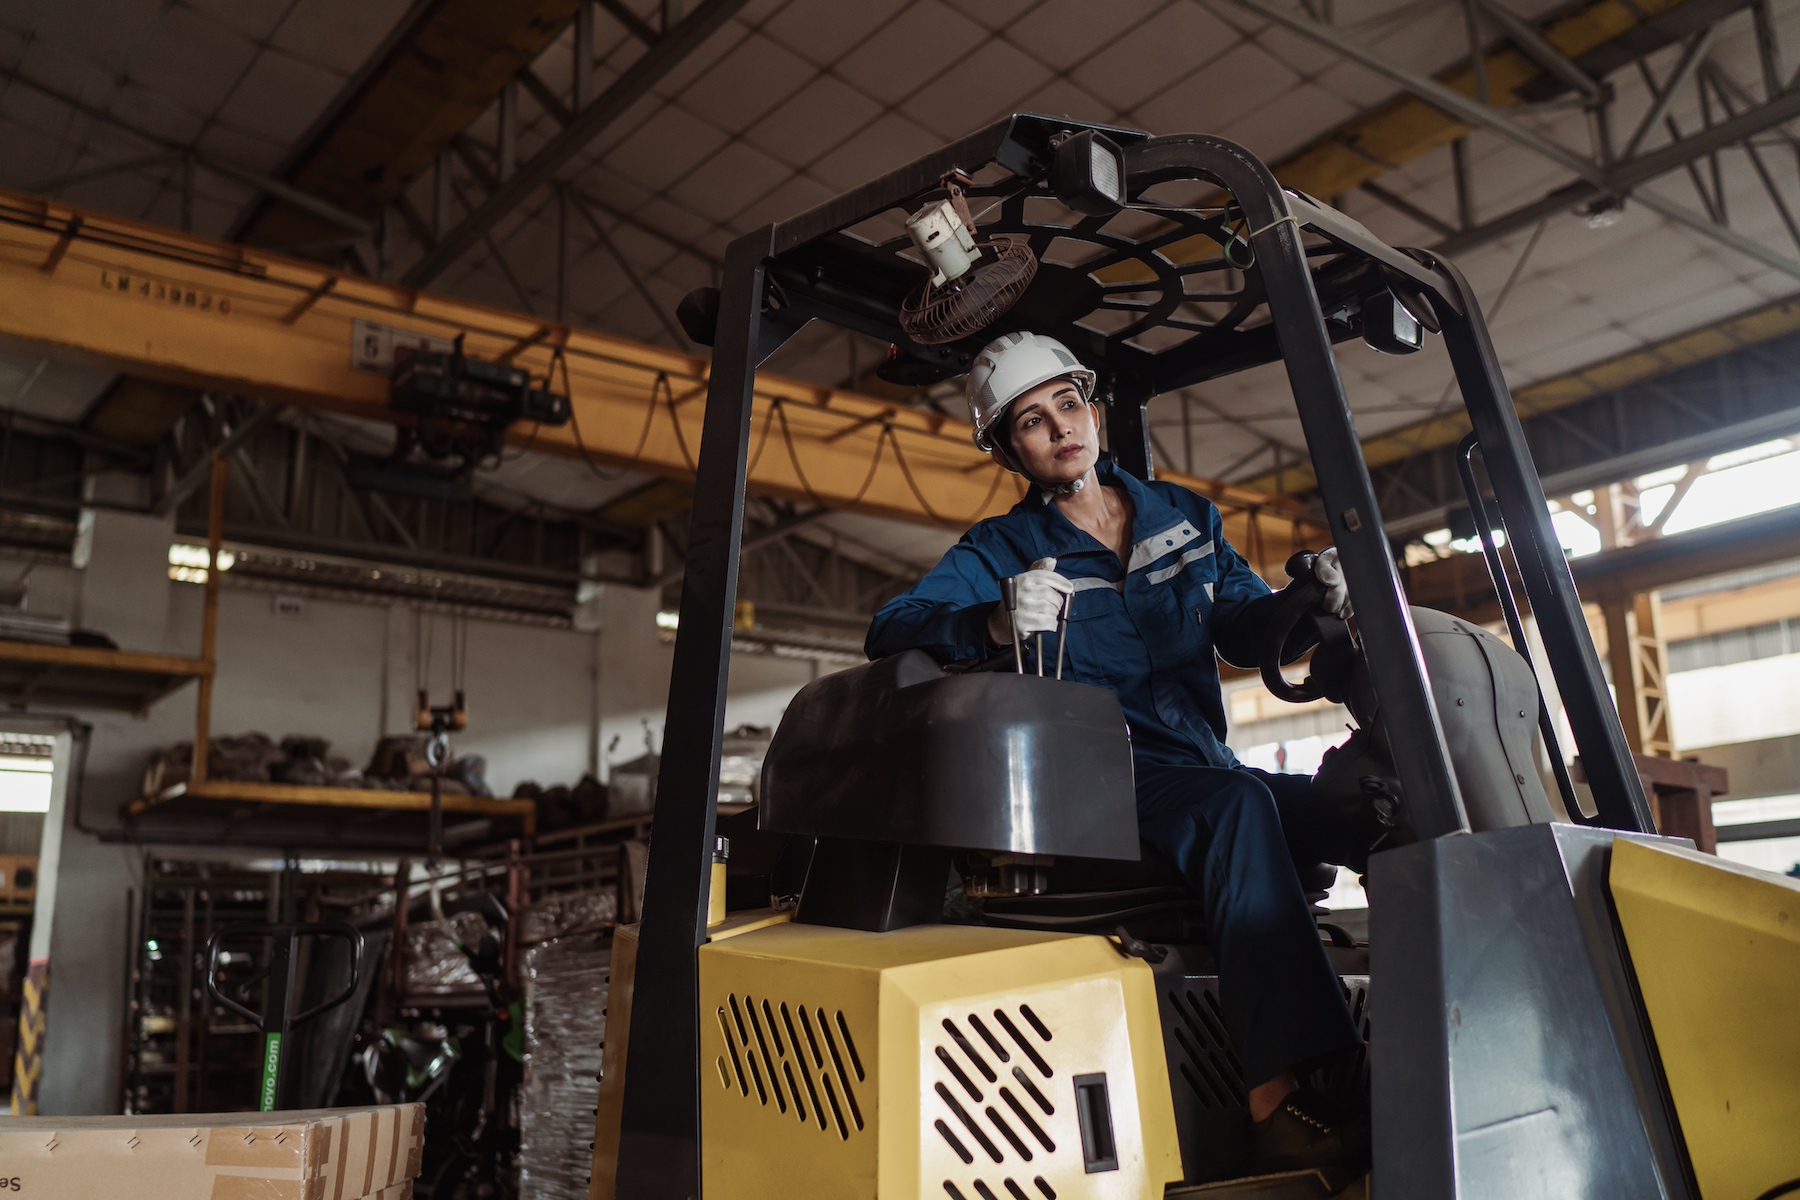 A warehouse worker drives a forklift in safety gear